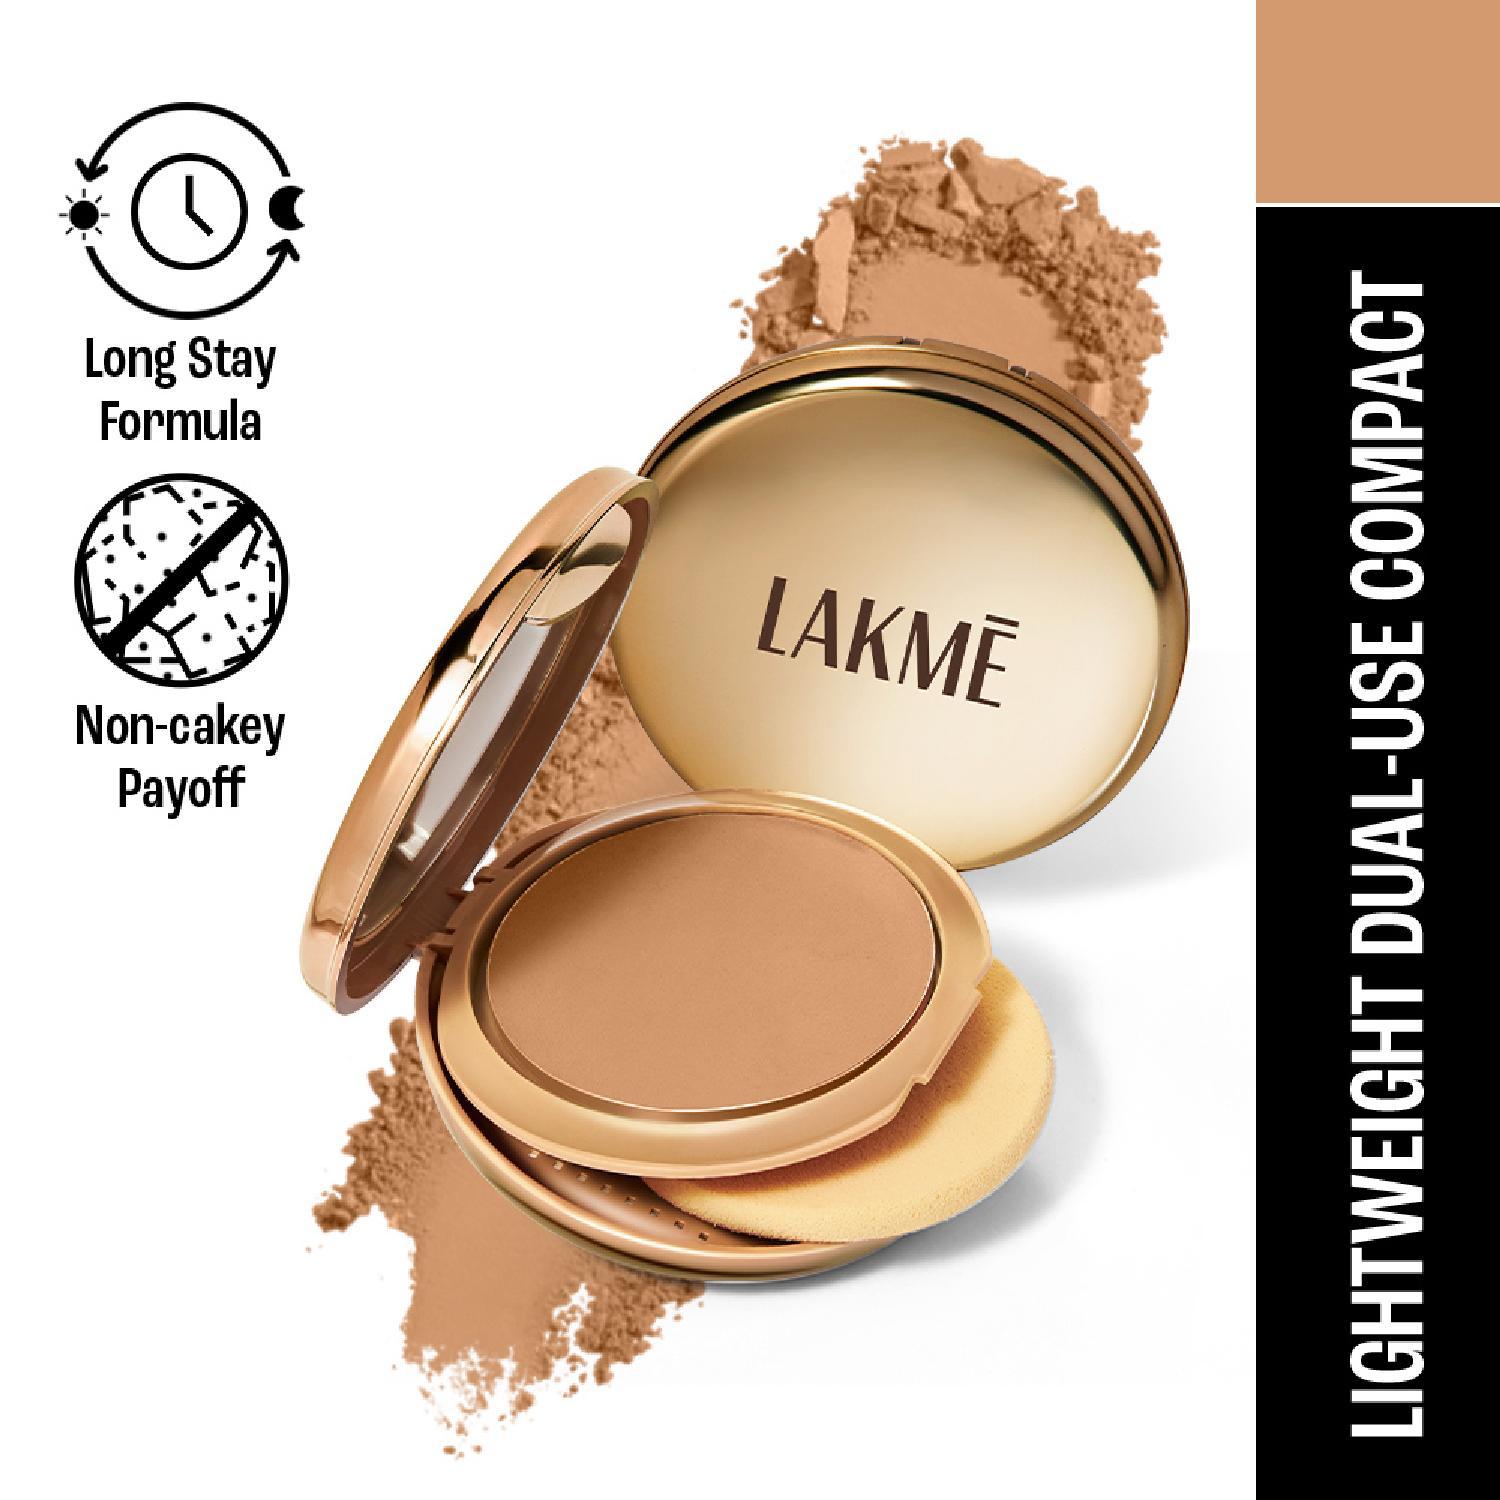 Lakme | Lakme 9 to 5 Unreal Dual Cover Pressed Powder, 2 In 1 Compact + Foundation, 30 Cinnamon (9g)